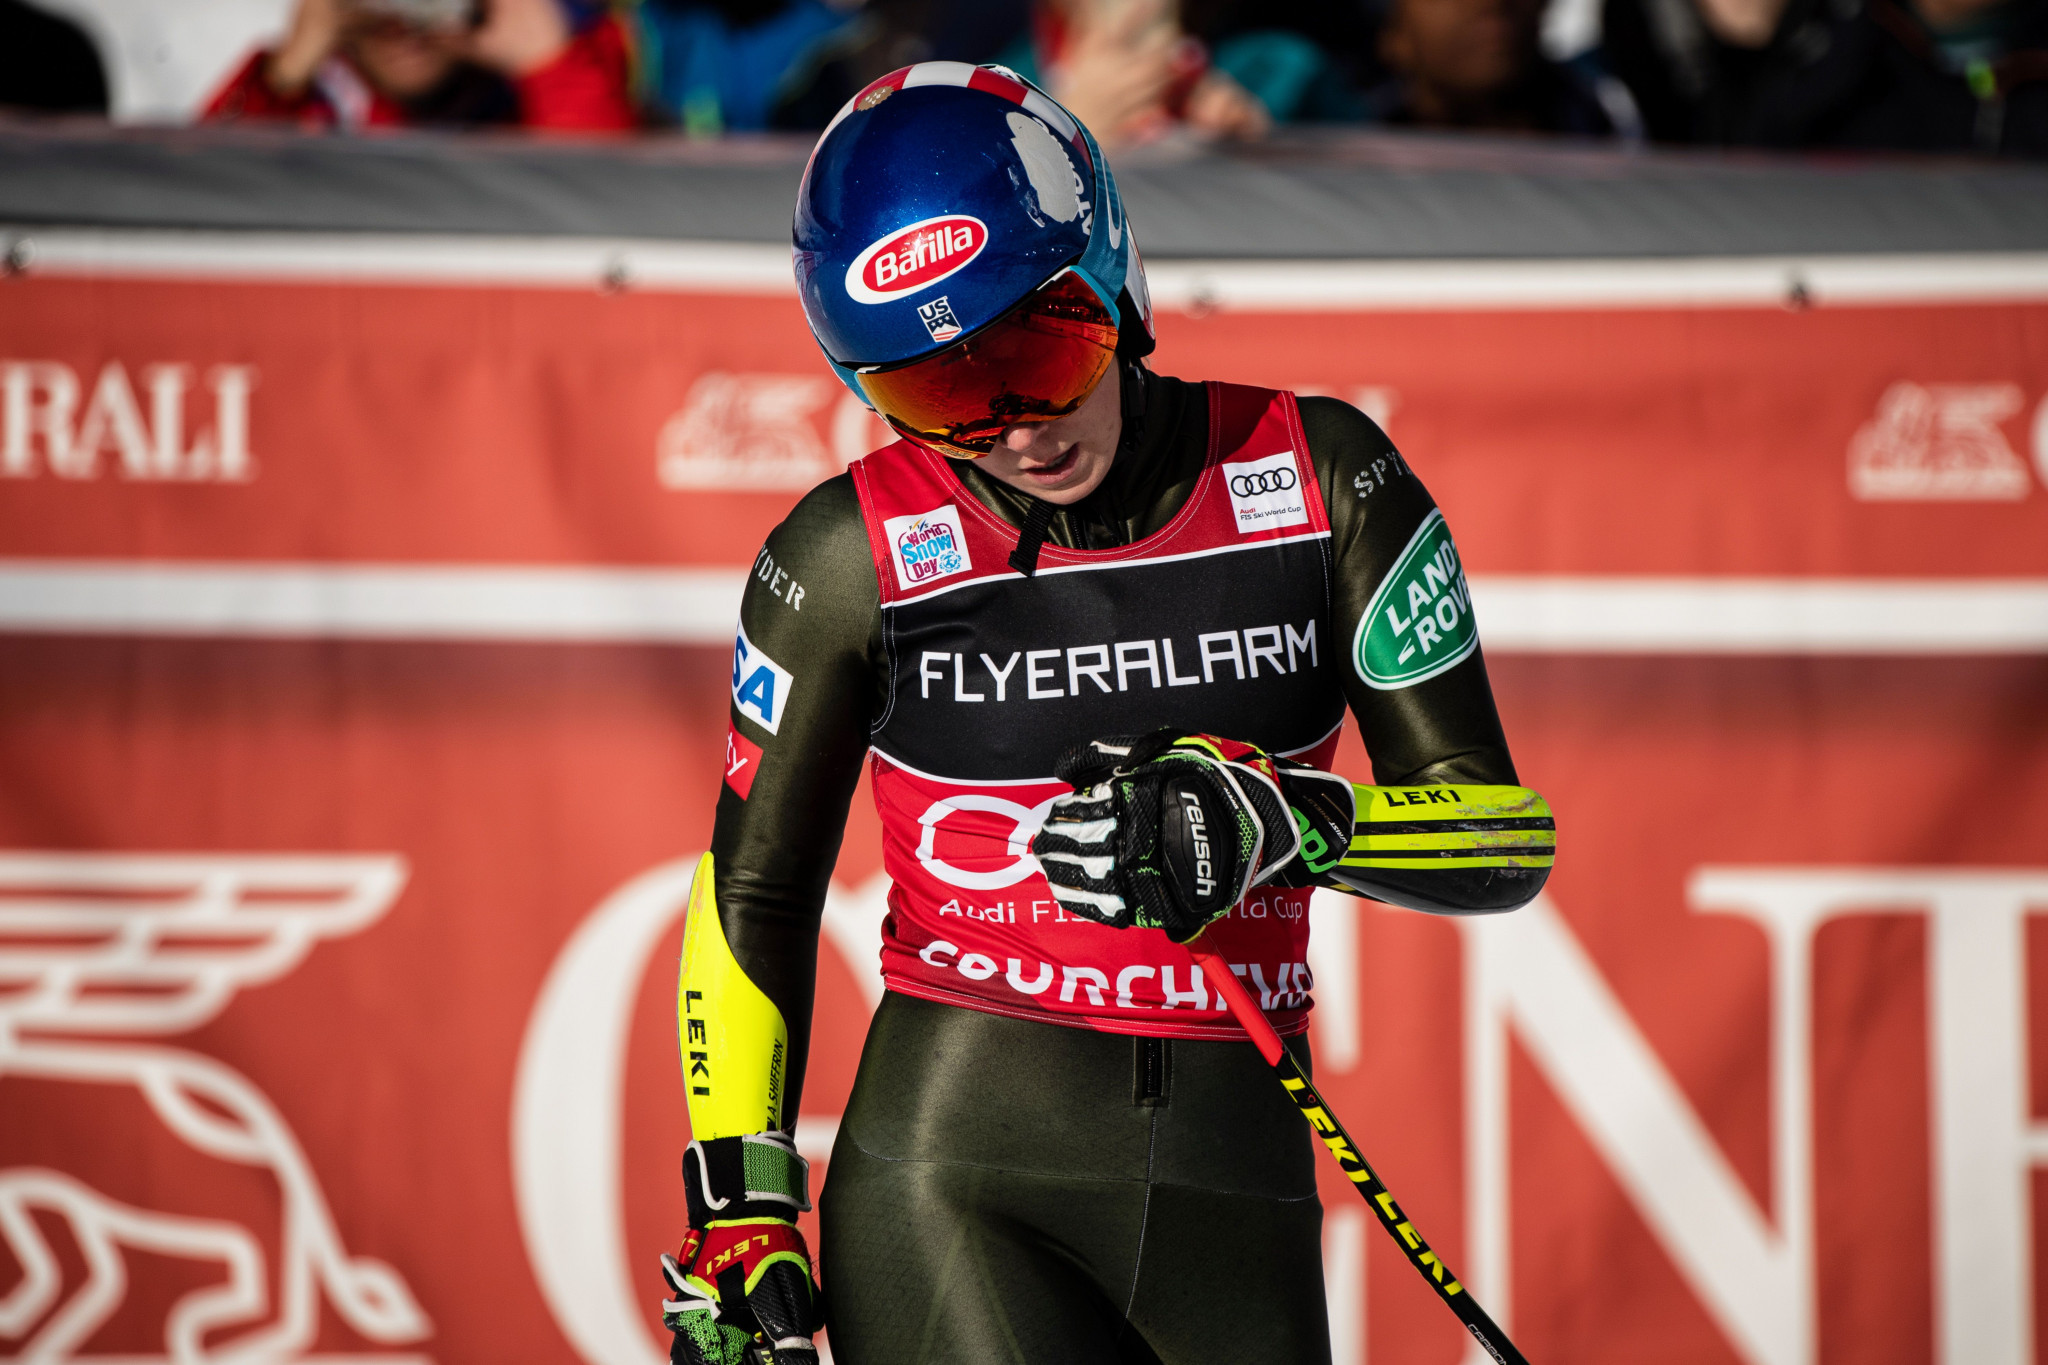 Mikaela Shiffrin finished 17th place in the giant slalom at the FIS Alpine Ski World Cup event in Courchevel ©Getty Images